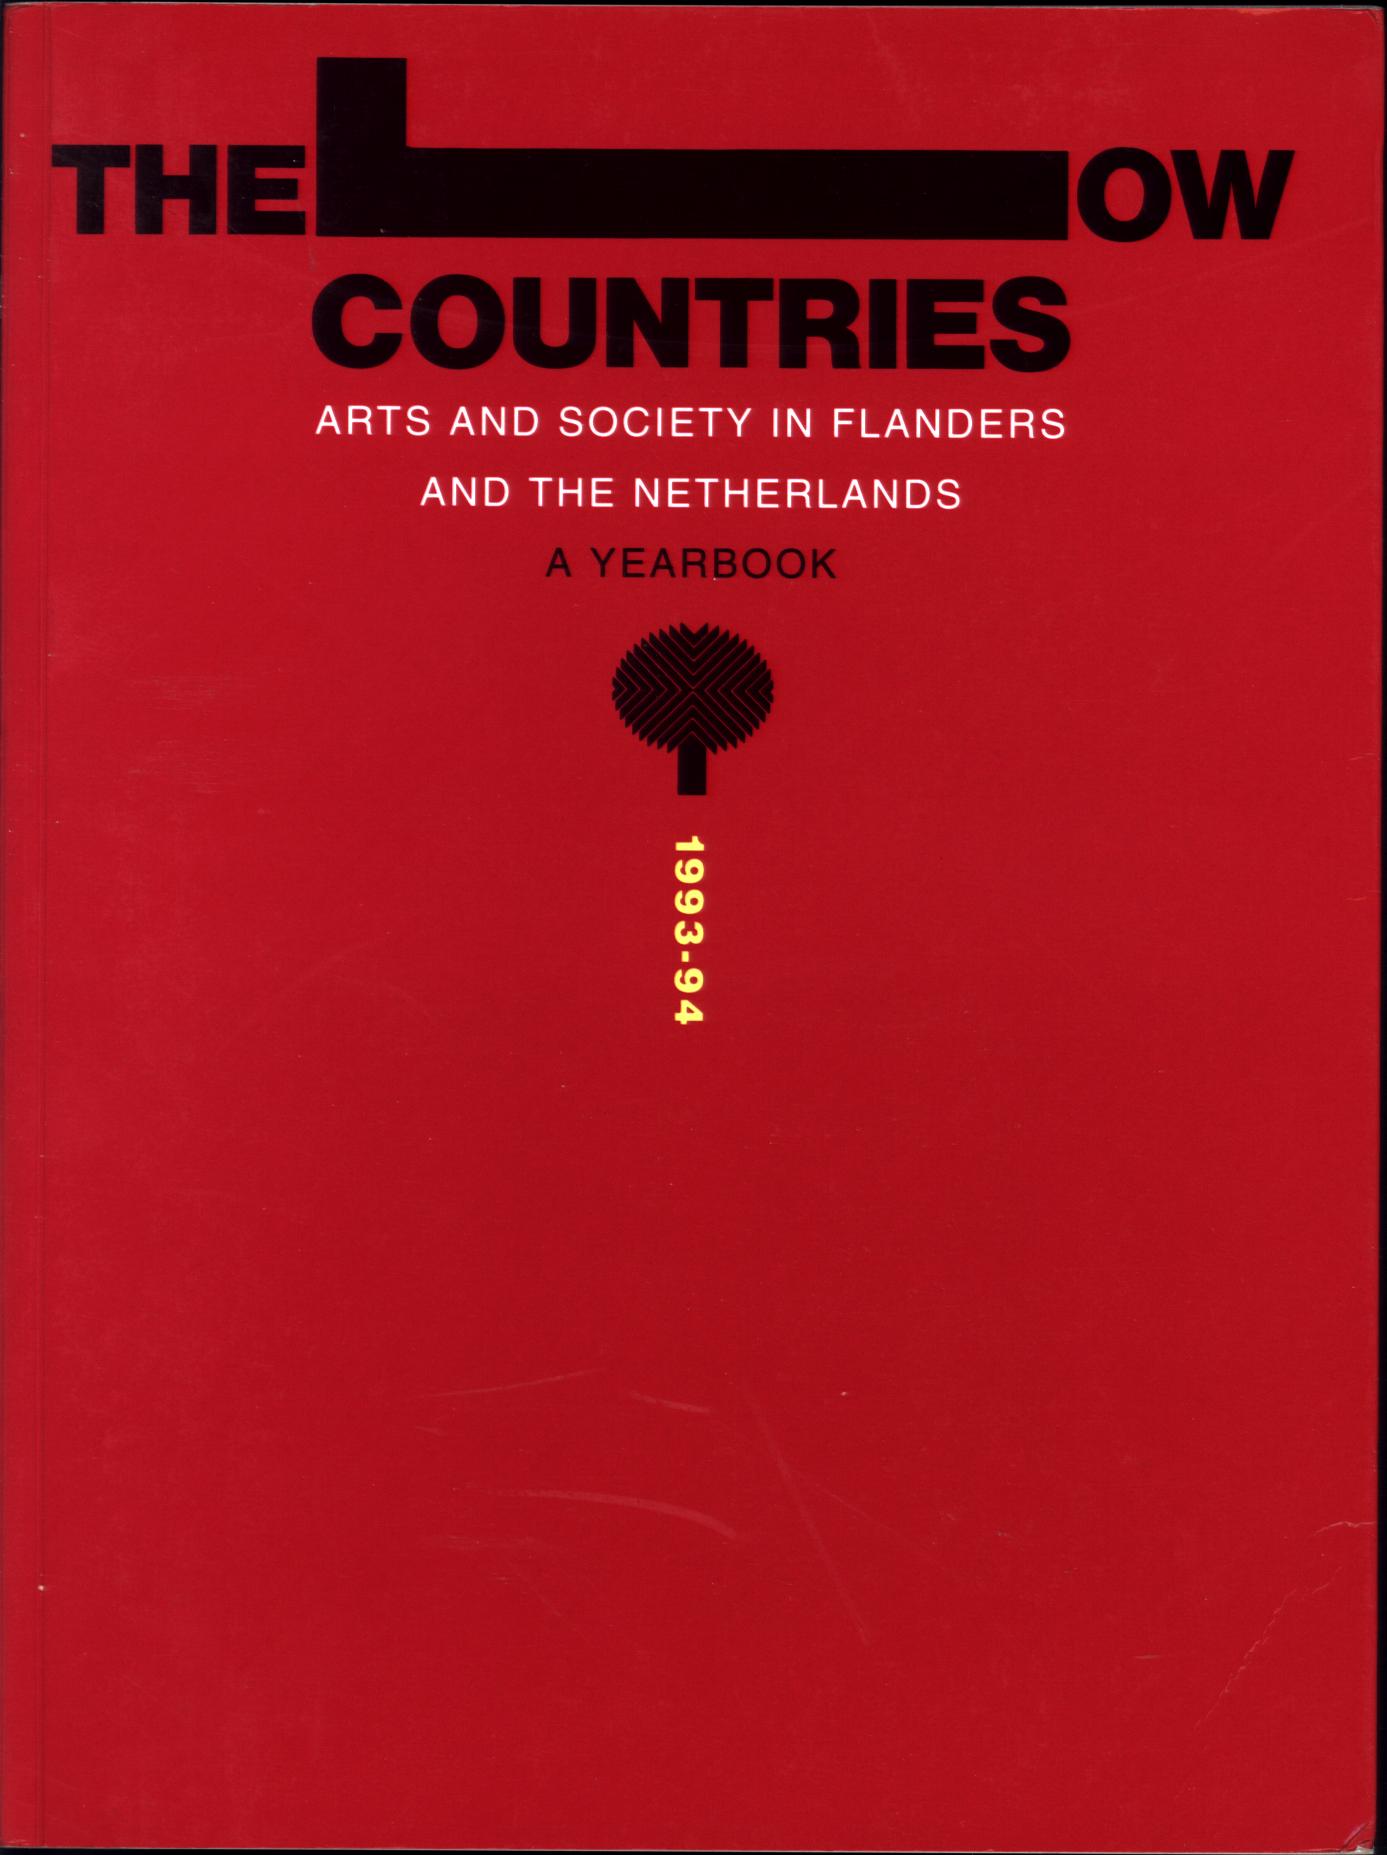 THE LOW COUNTRIES: arts and society in Flanders and the Netherlands--a yearbook, 1993-94. 